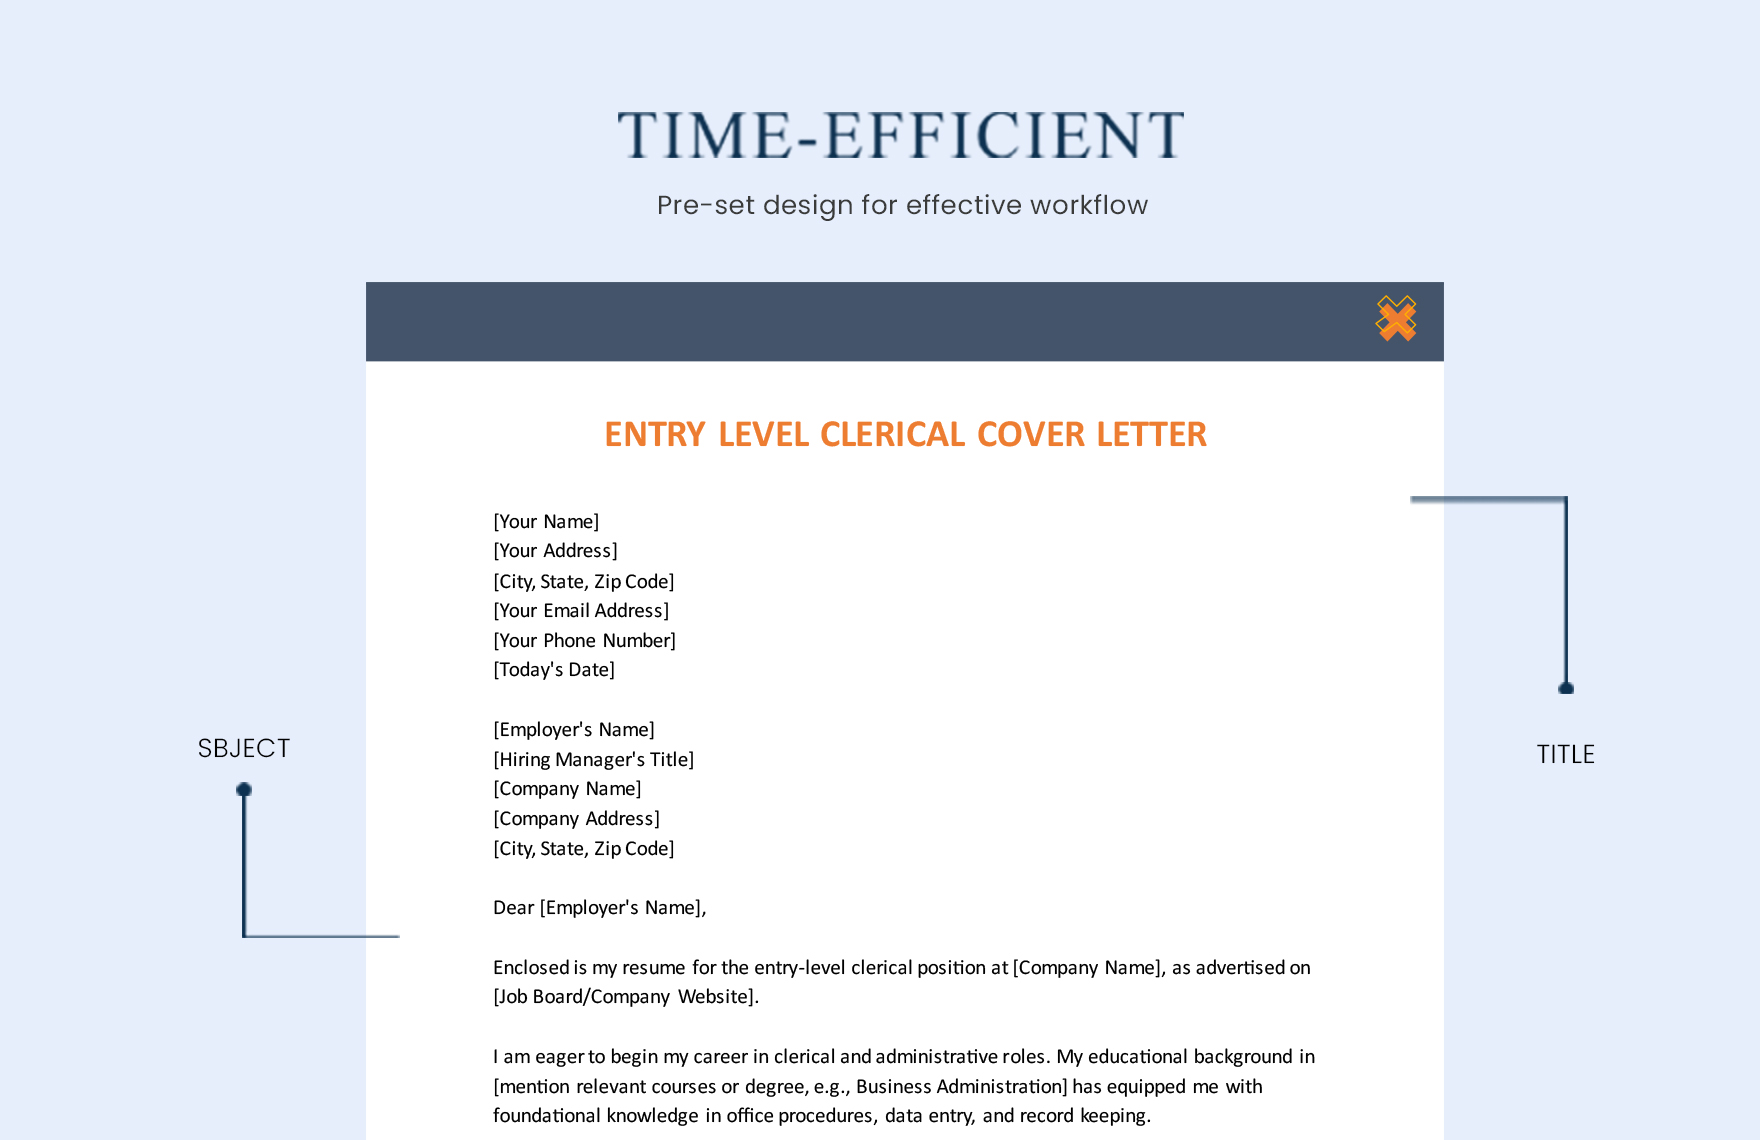 Entry Level Clerical Cover Letter